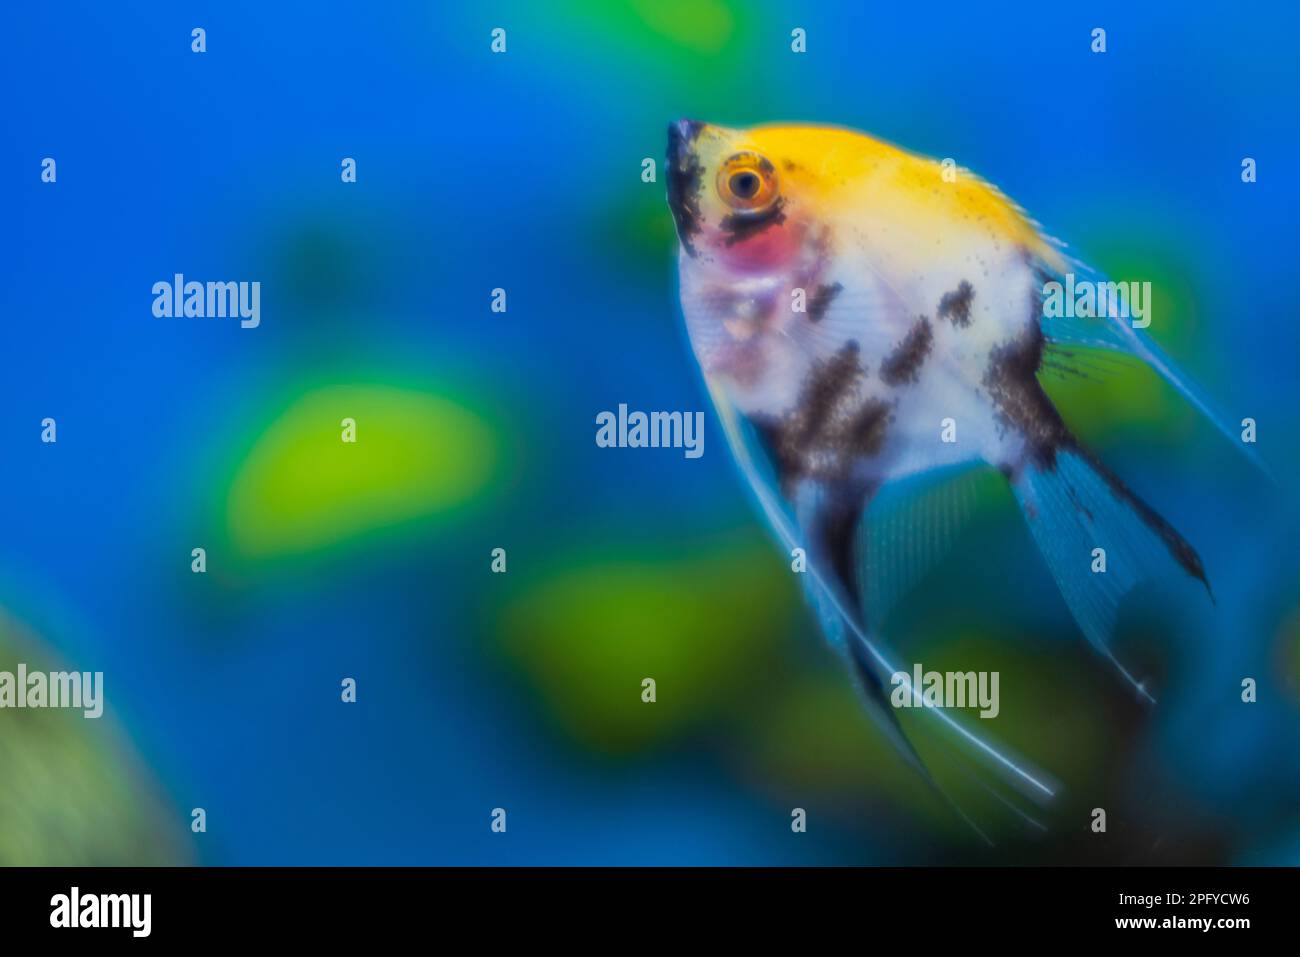 Close up view of aquarium with colorful angelfish. Stock Photo